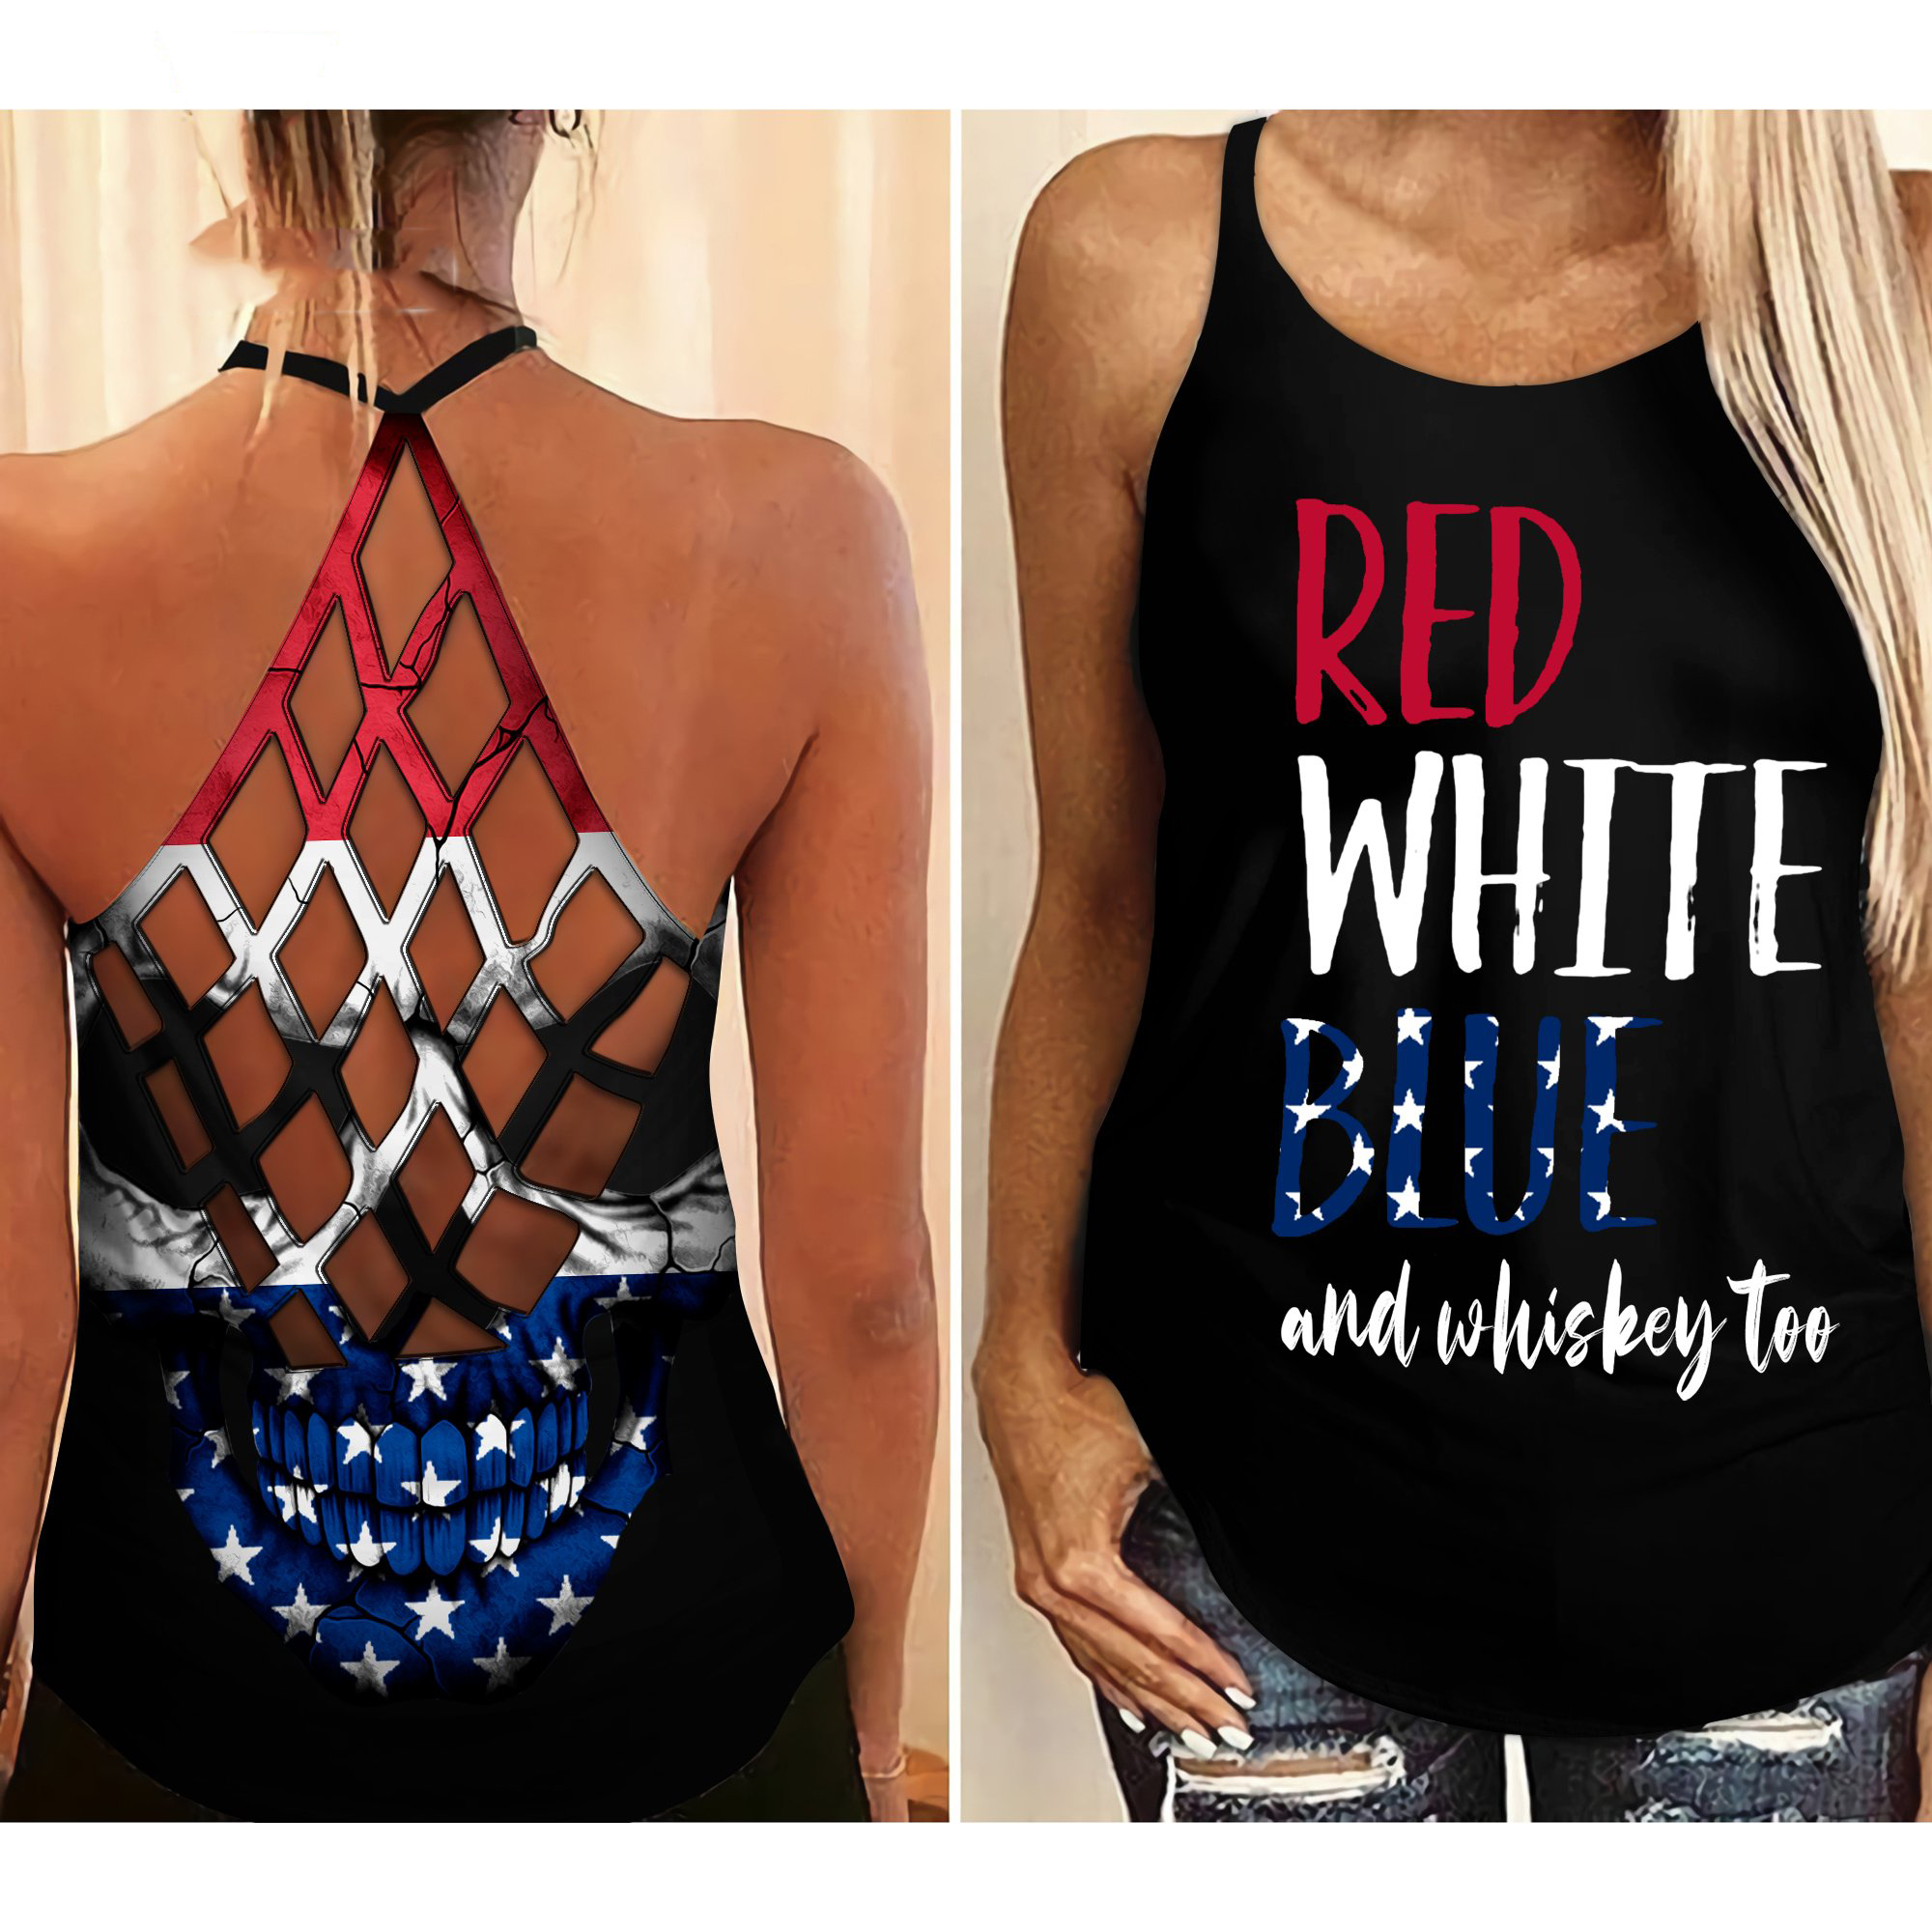 Red white blue and whiskey too criss cross open back camisole tank top